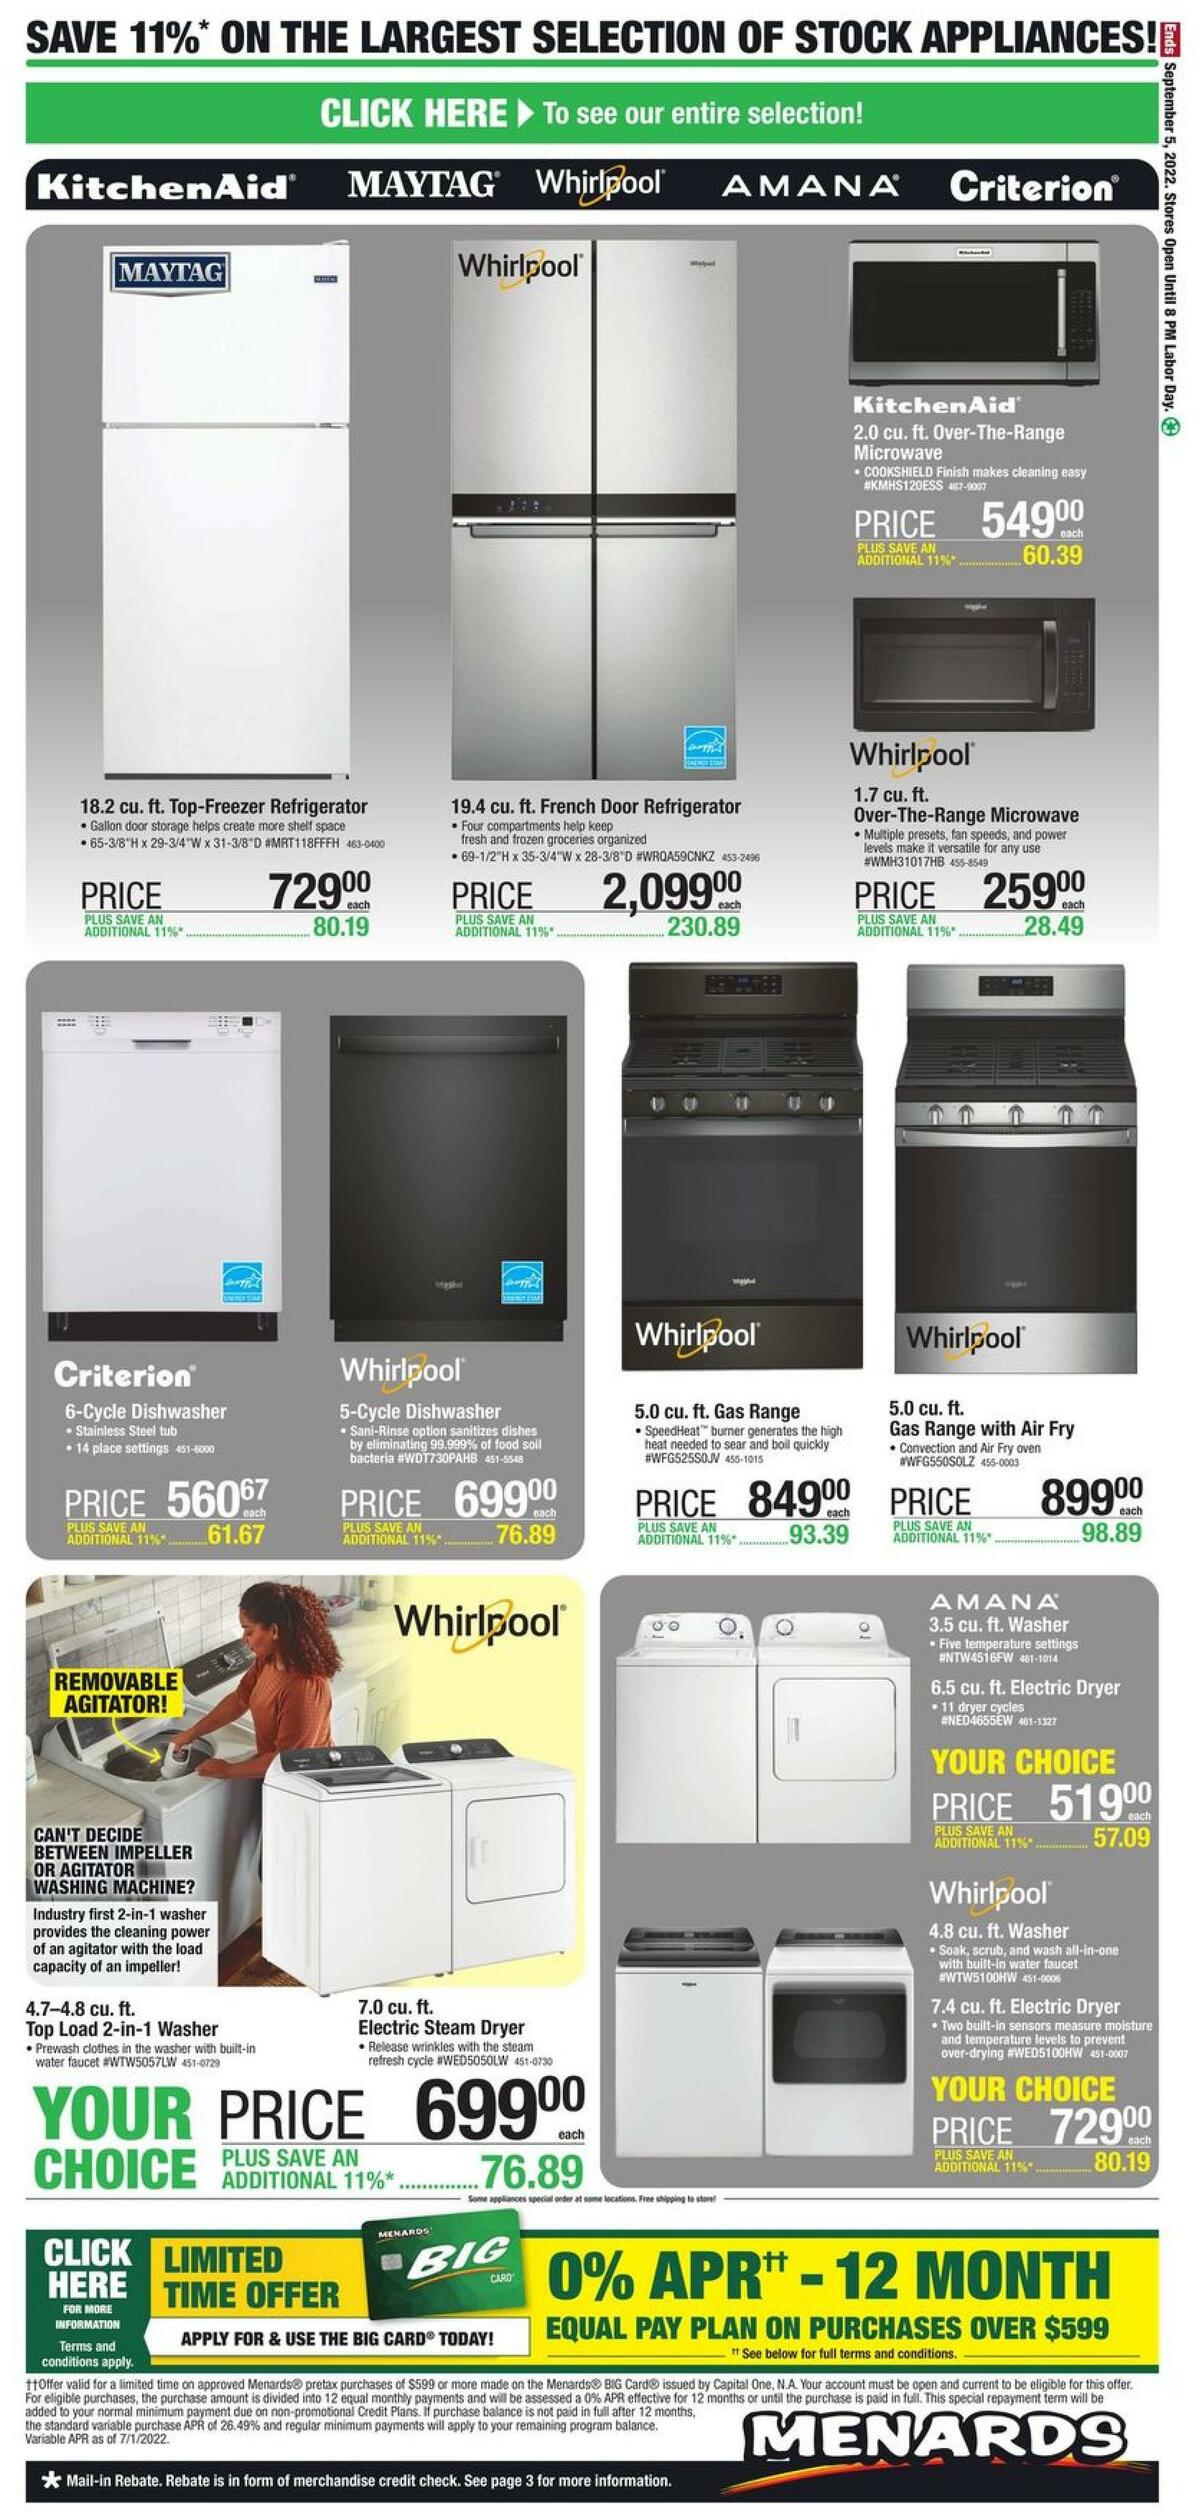 Menards 11% Off Your Dream Kitchen! Weekly Ad from August 25